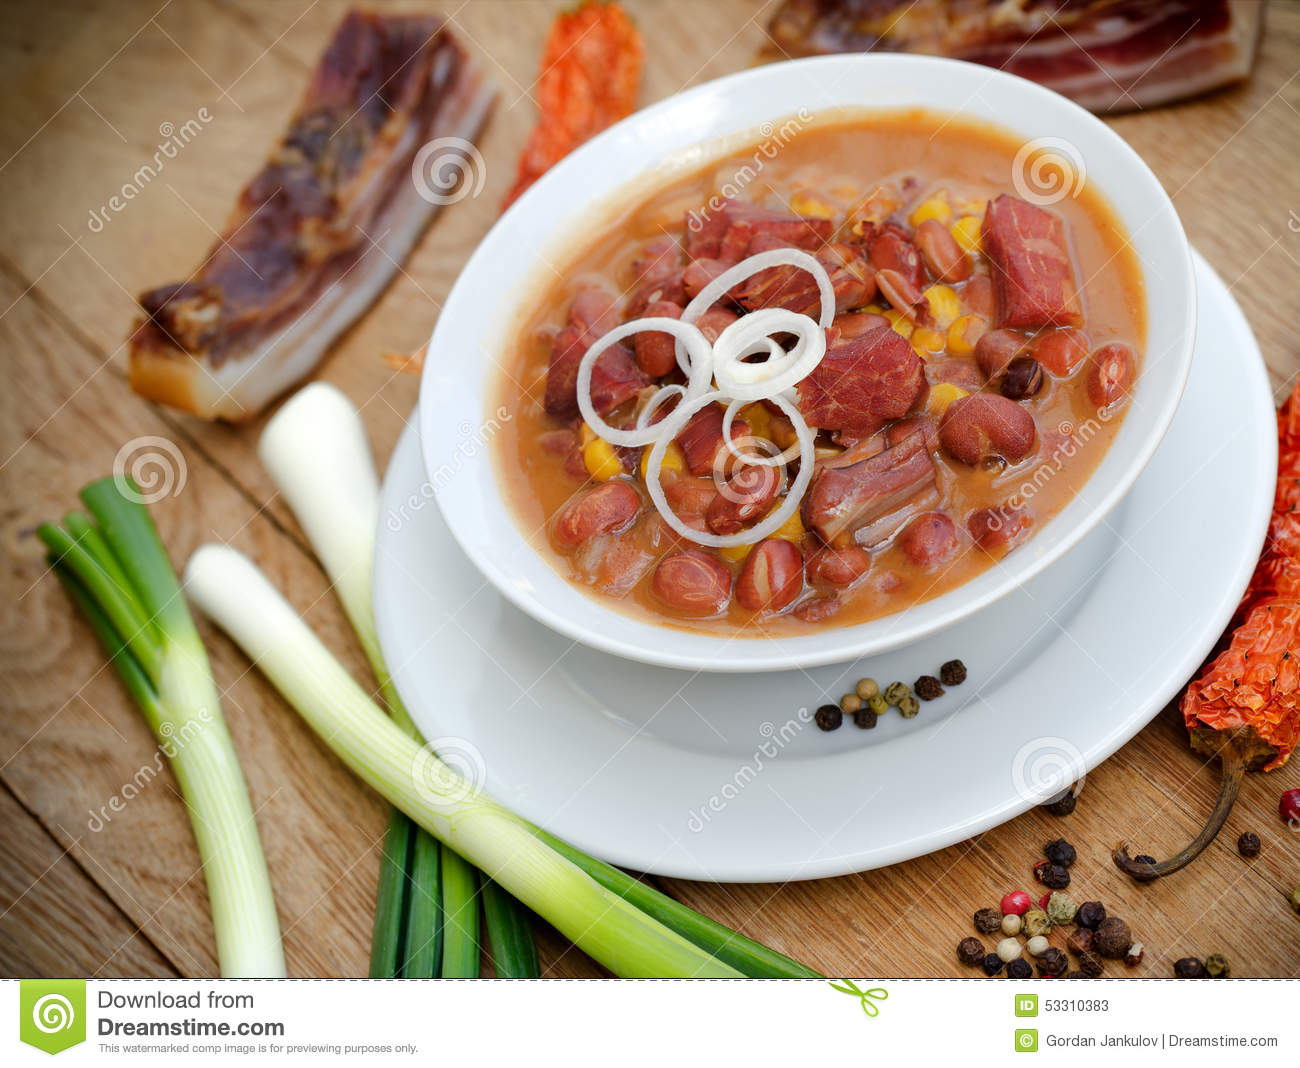 Cooked Beans With Smoked Meat Stock Photo   Image  53310383